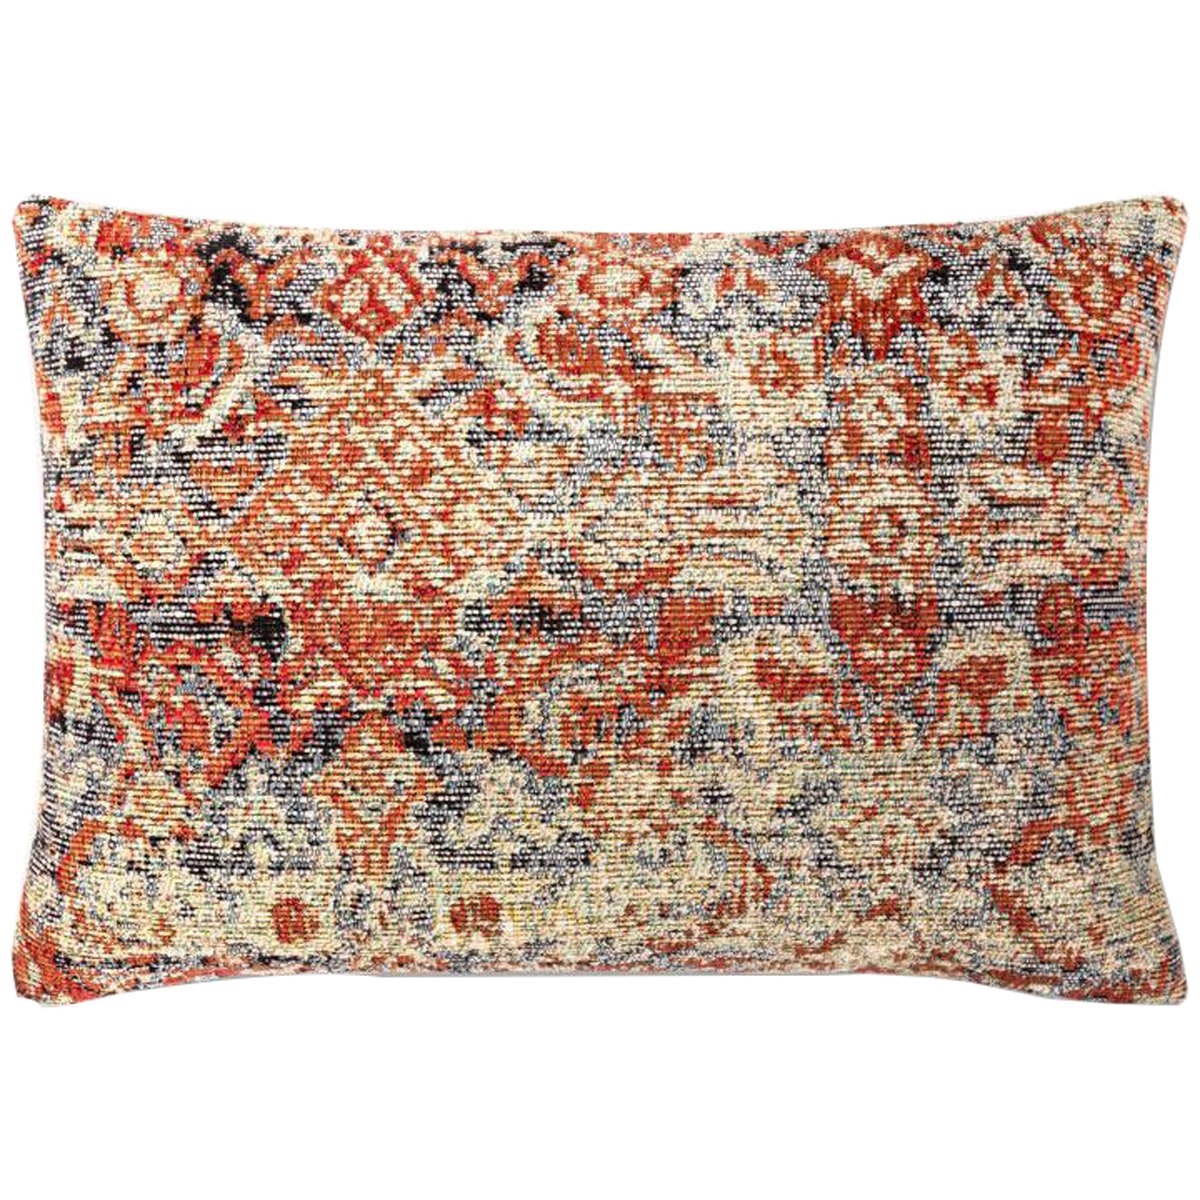 Loloi P0880 Red and Multi Pillow, Set of 2